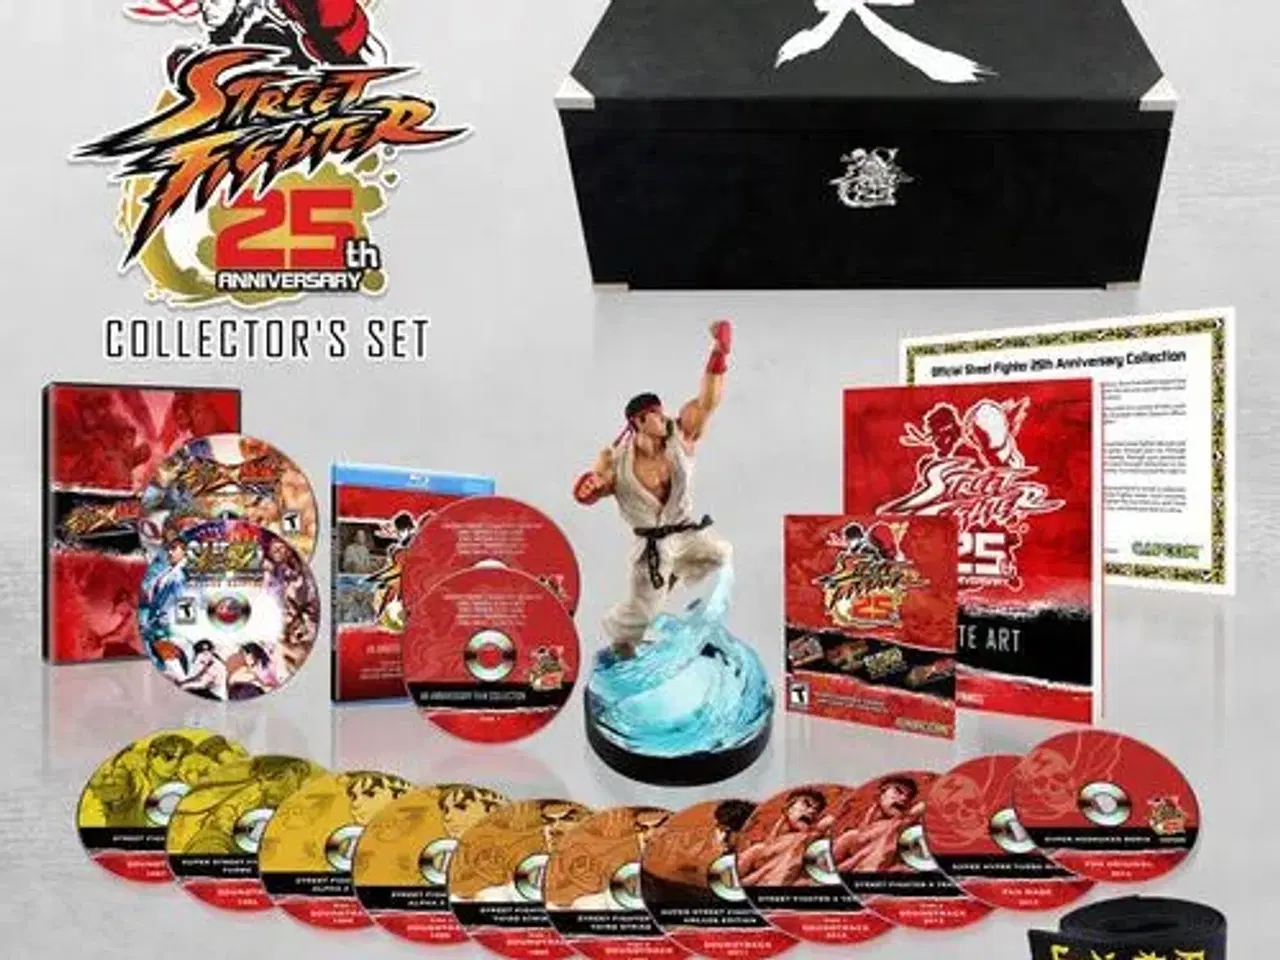 Billede 1 - Street Fighter 25th anniversary Collecto